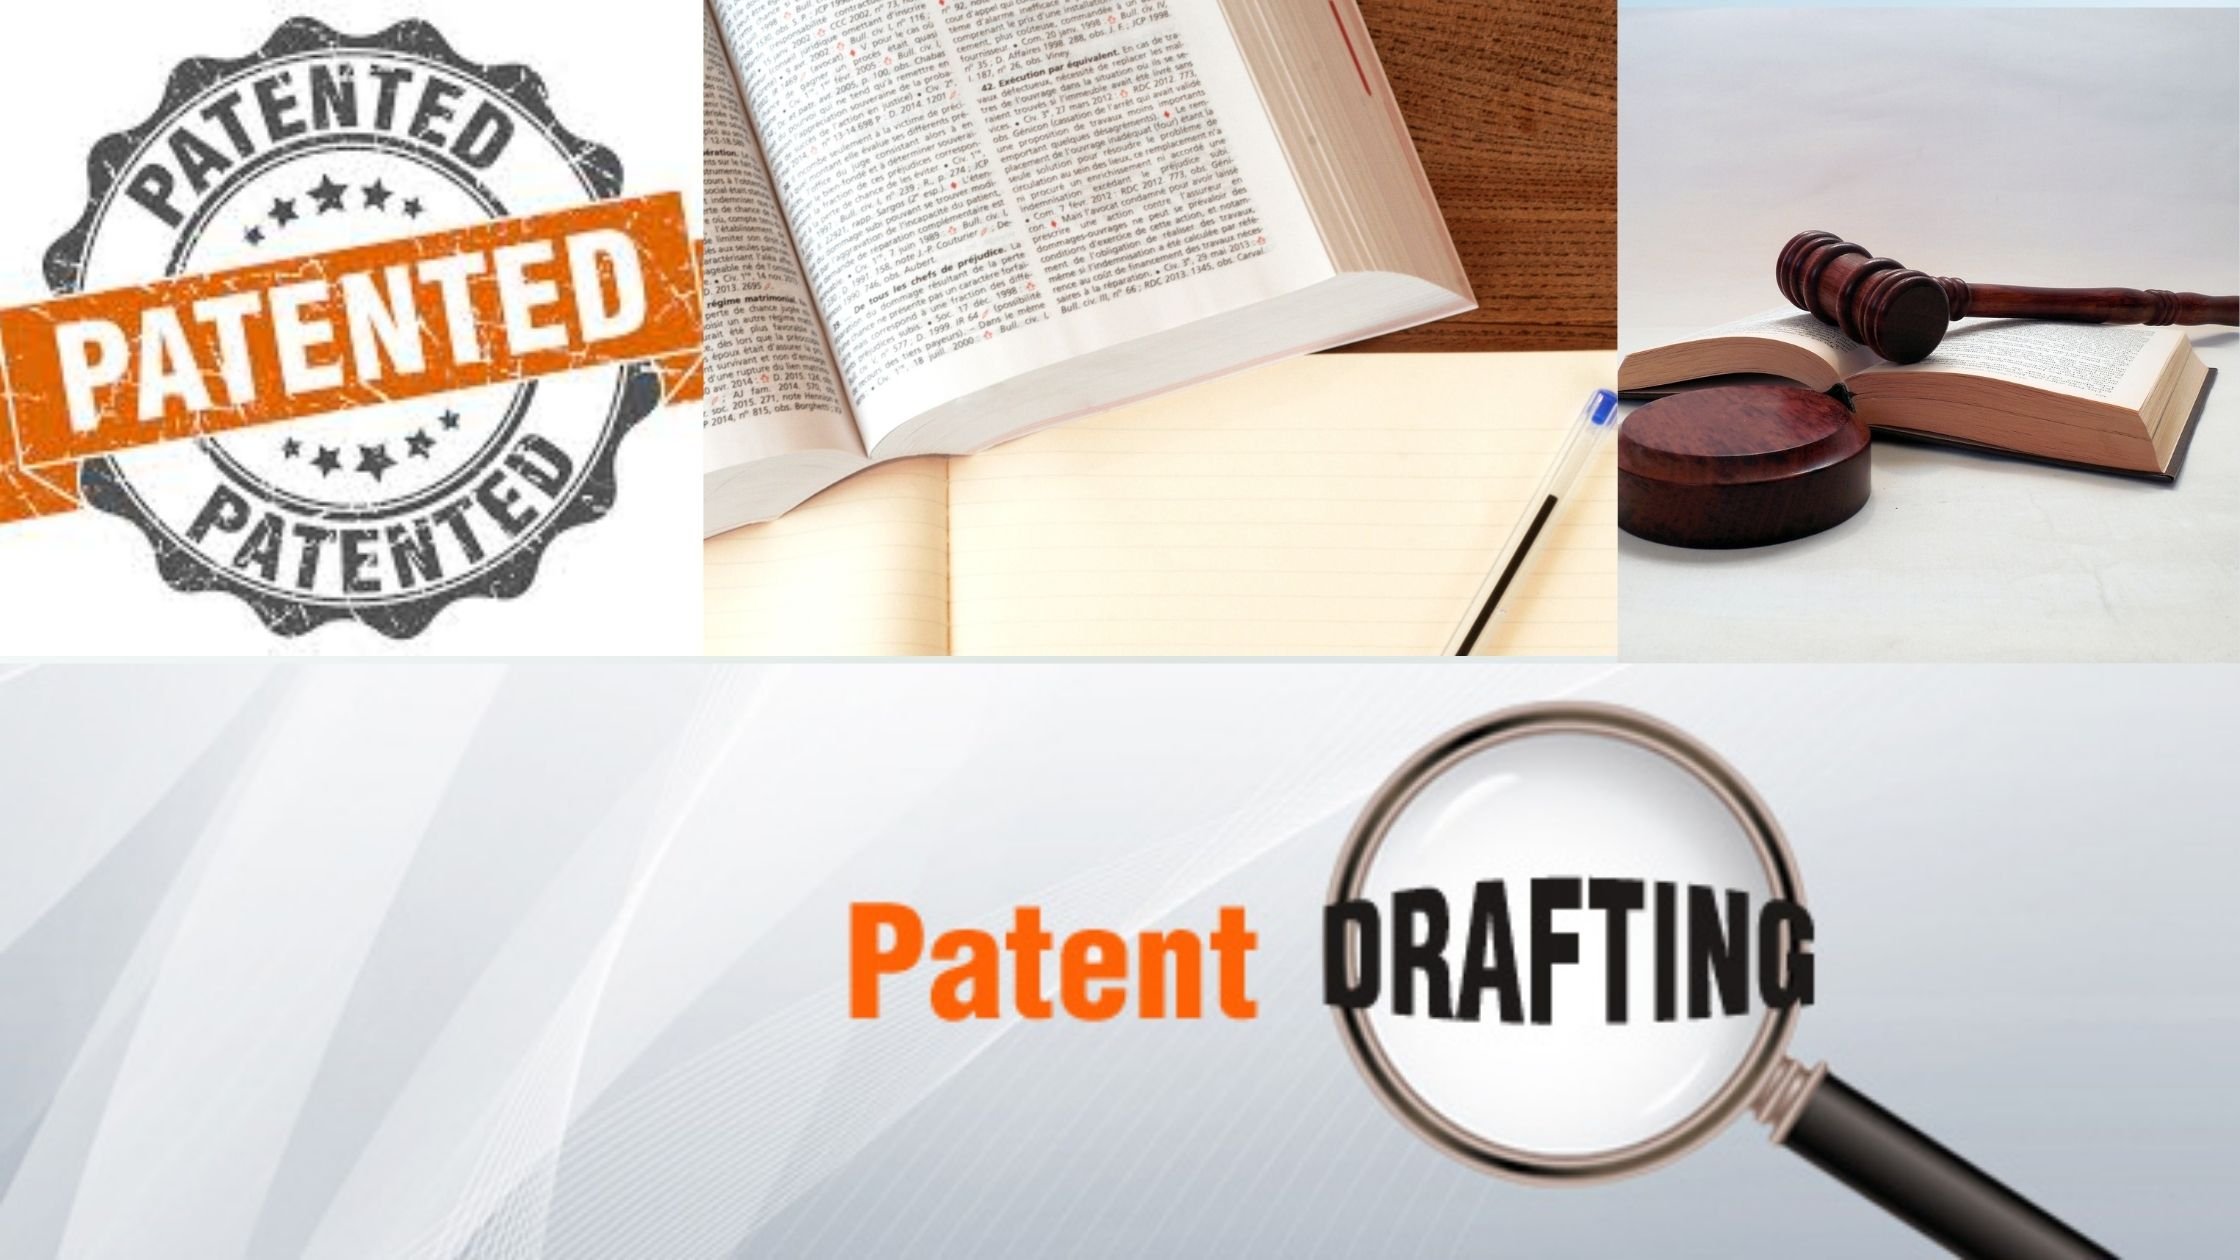 All about Patent Drafting